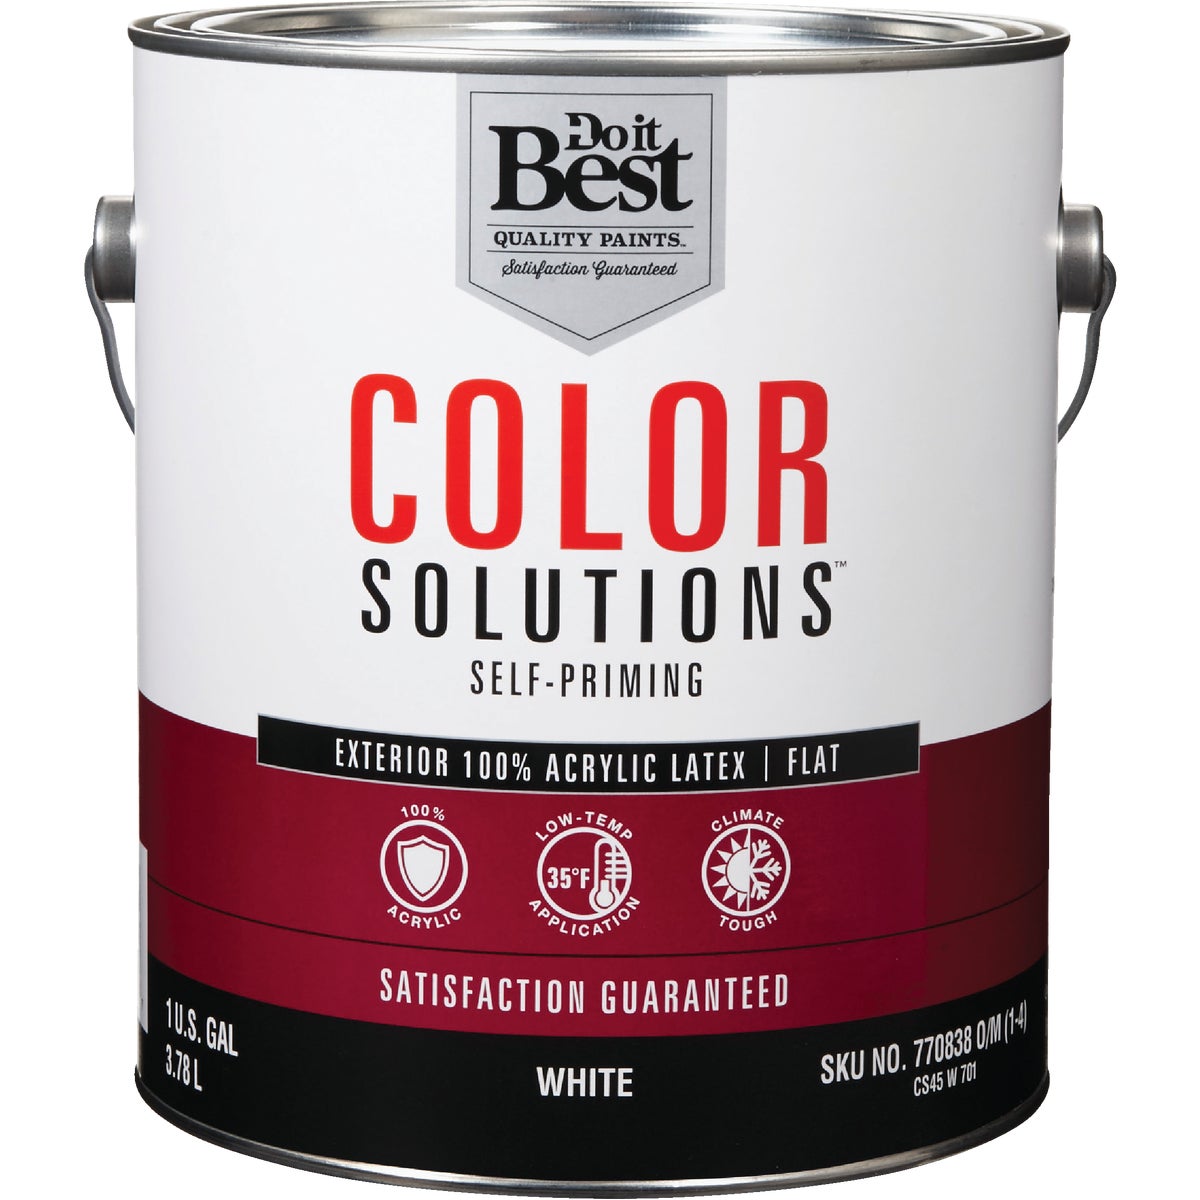 Do it Best Color Solutions 100% Acrylic Latex Self-Priming Flat Exterior House Paint, White, 1 Gal.